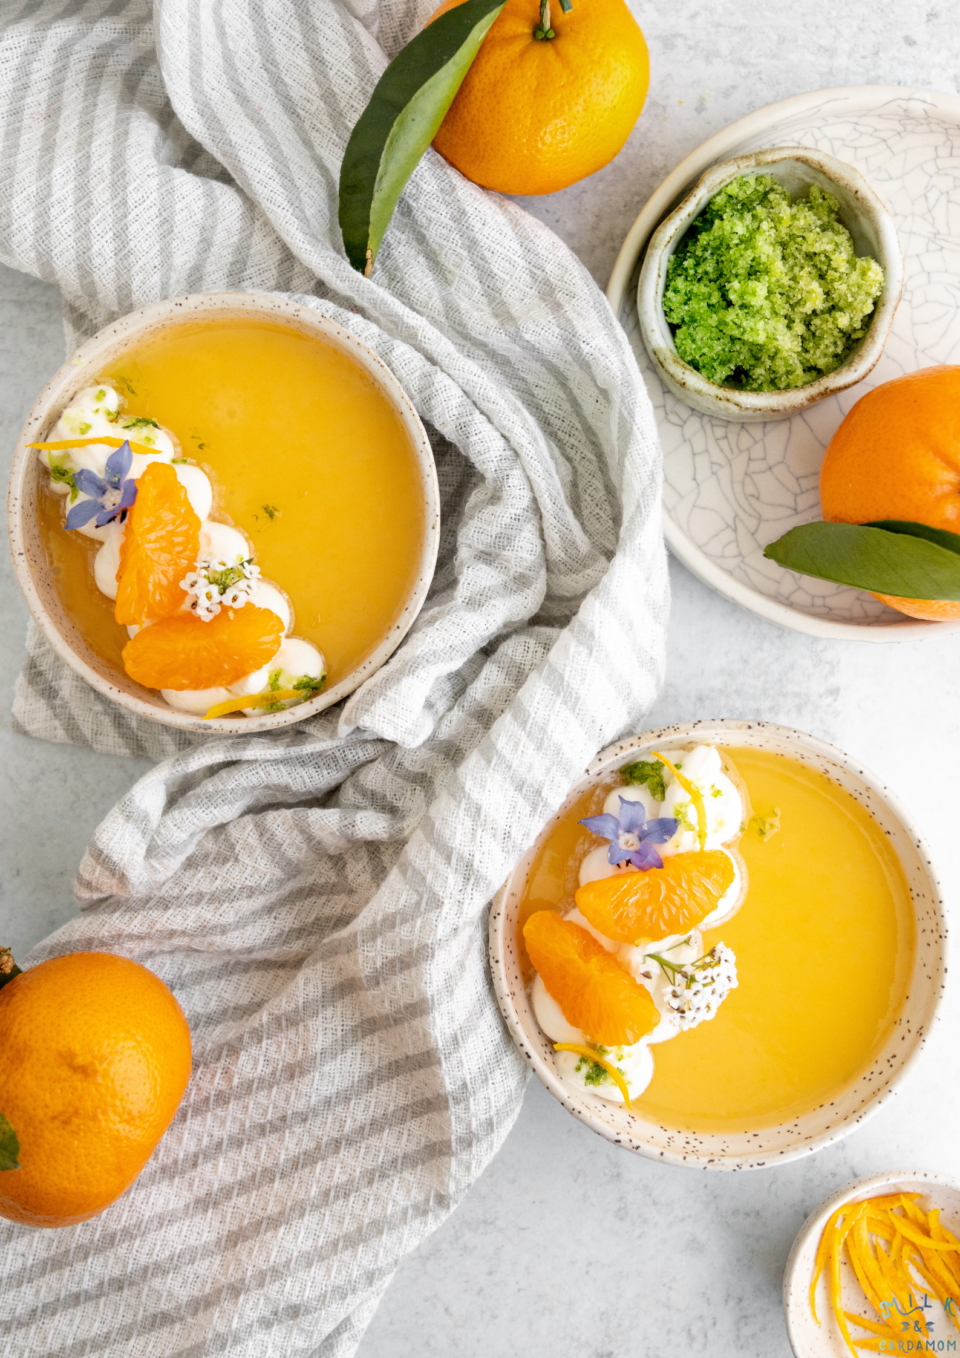 Coconut and Citrus Jelly | Milk and Cardamom